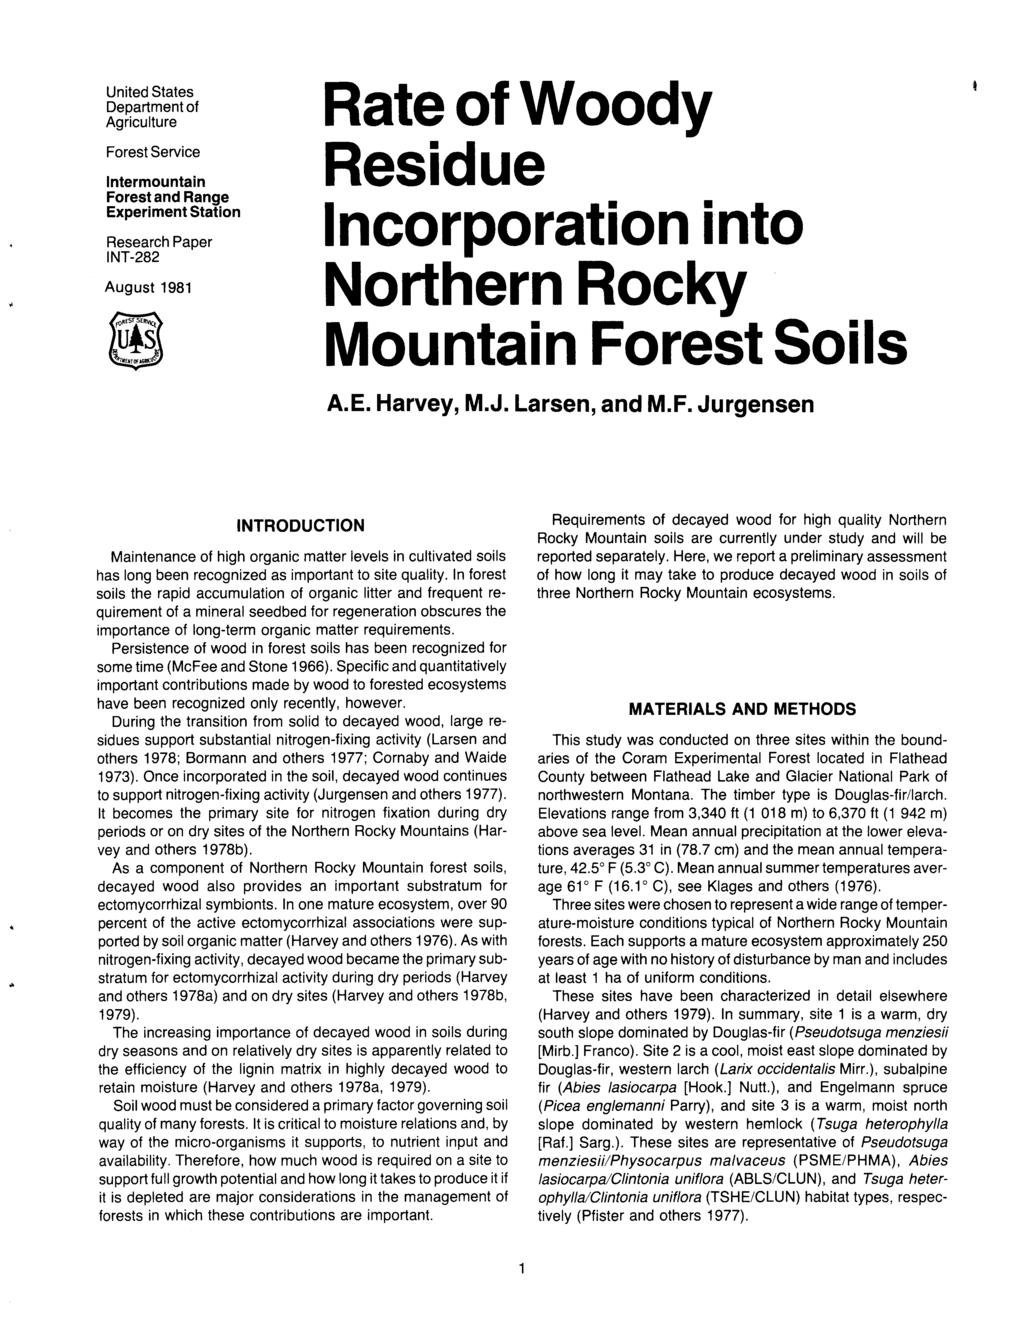 United States Department of Agriculture Forest Service Intermountain Forest and Range Experiment Station Research Paper INT-282 August 1981 Rate of Woody Residue Incorporation into Northern Rocky